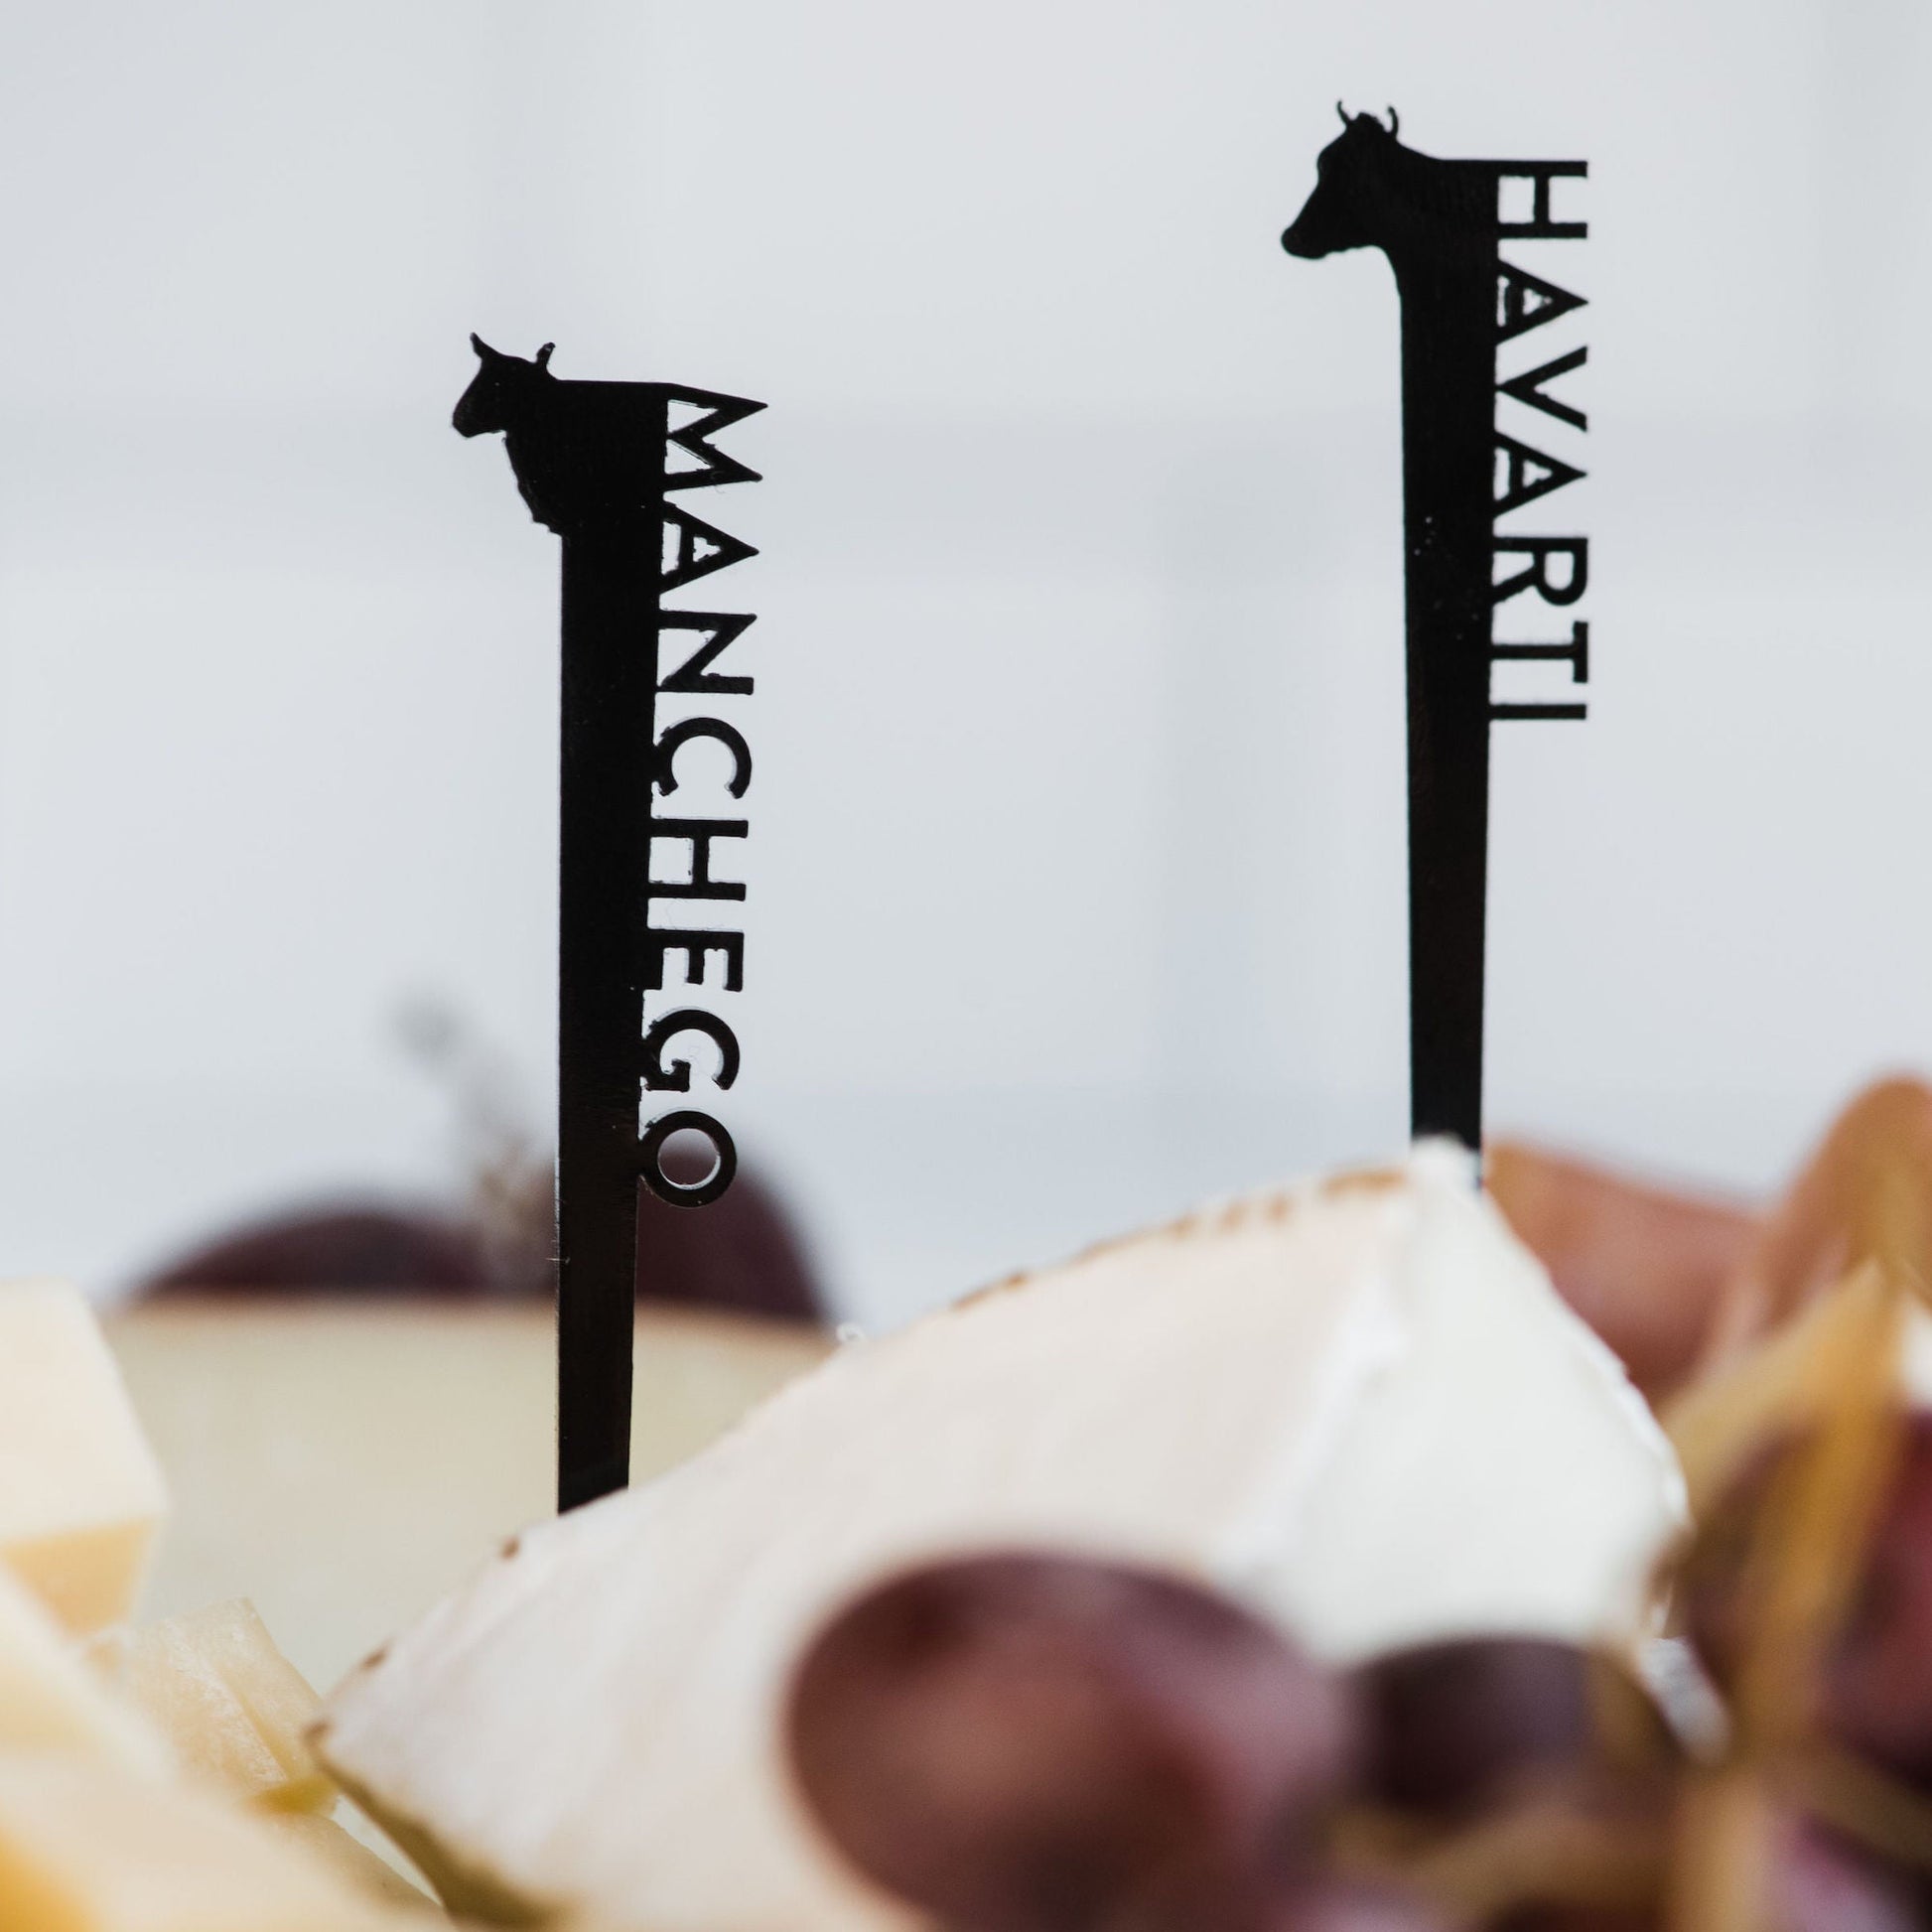 Cheese labels - laser cut black acrylic with cheese name and animal head - by LeeMo Designs in Bend, Oregon